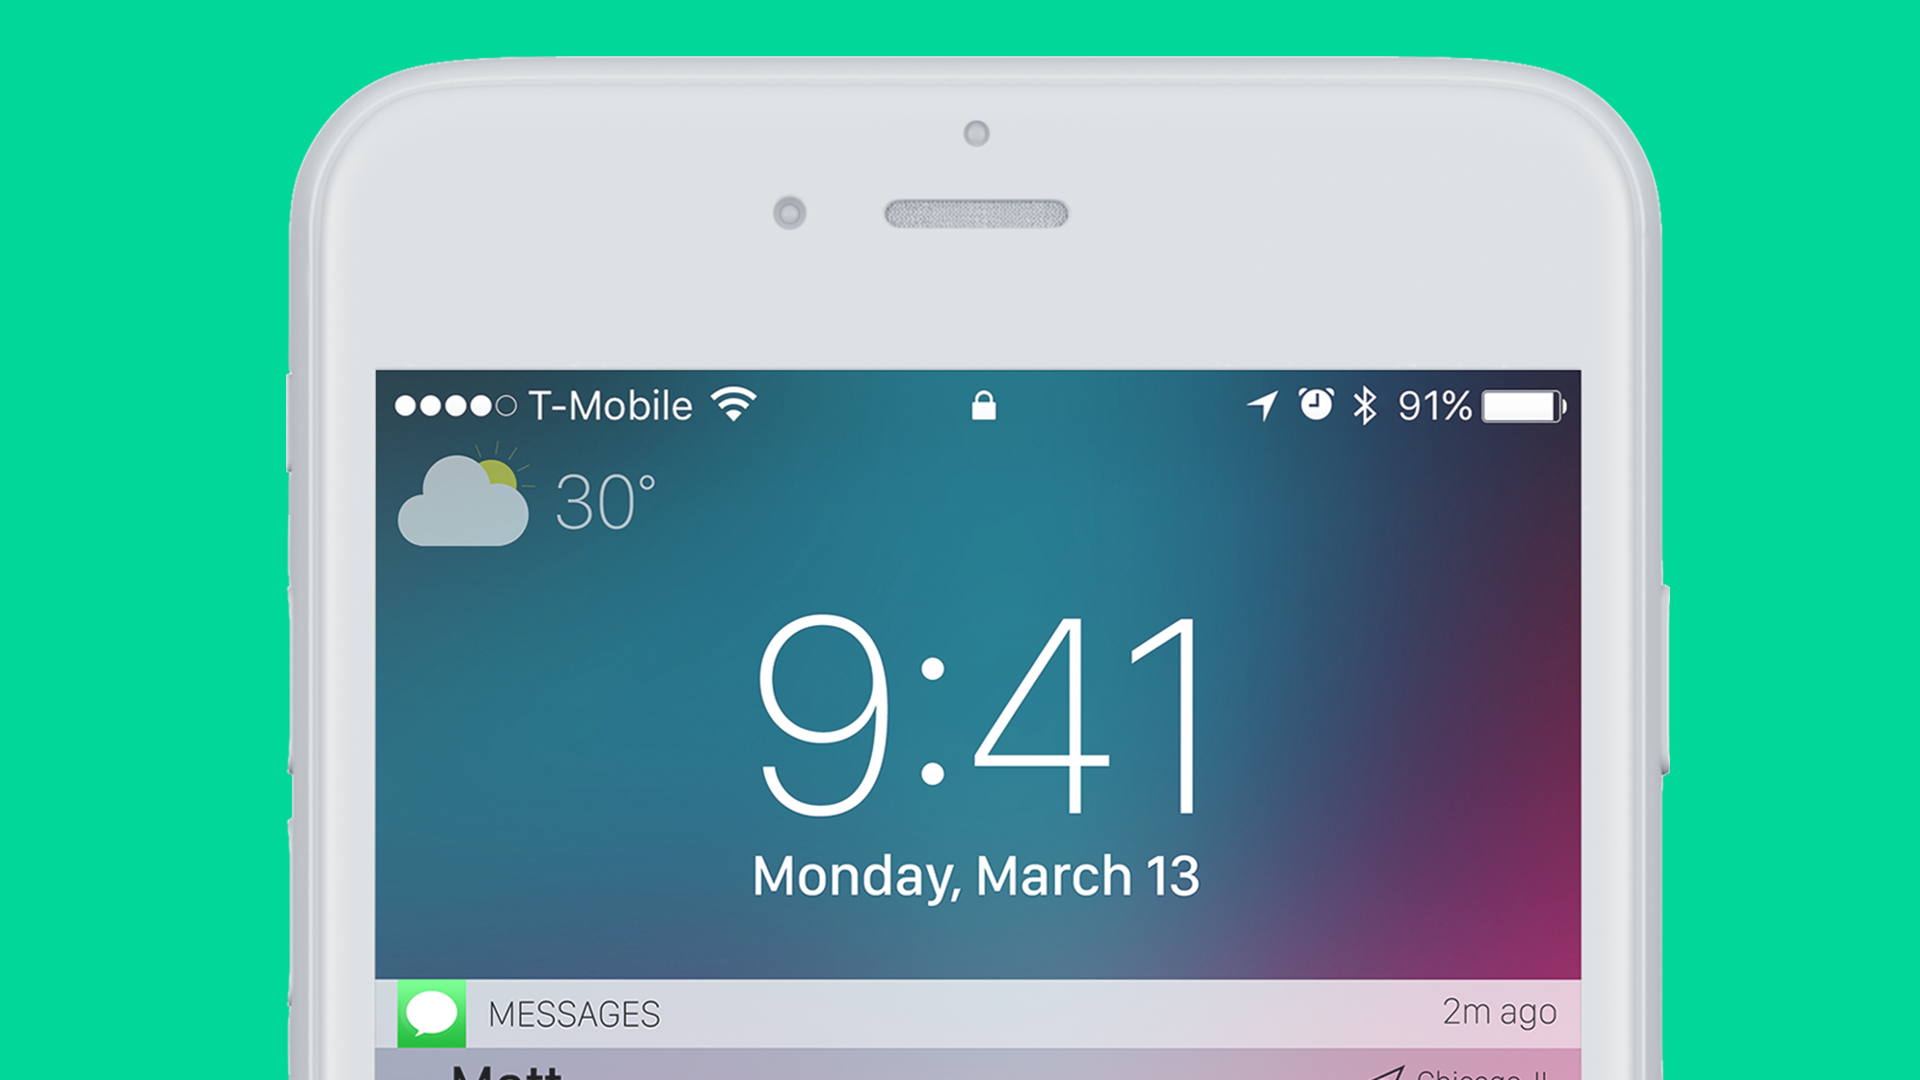 Ios 11 Lock Screen Gets Re Imagined In Brand New Concept Photos